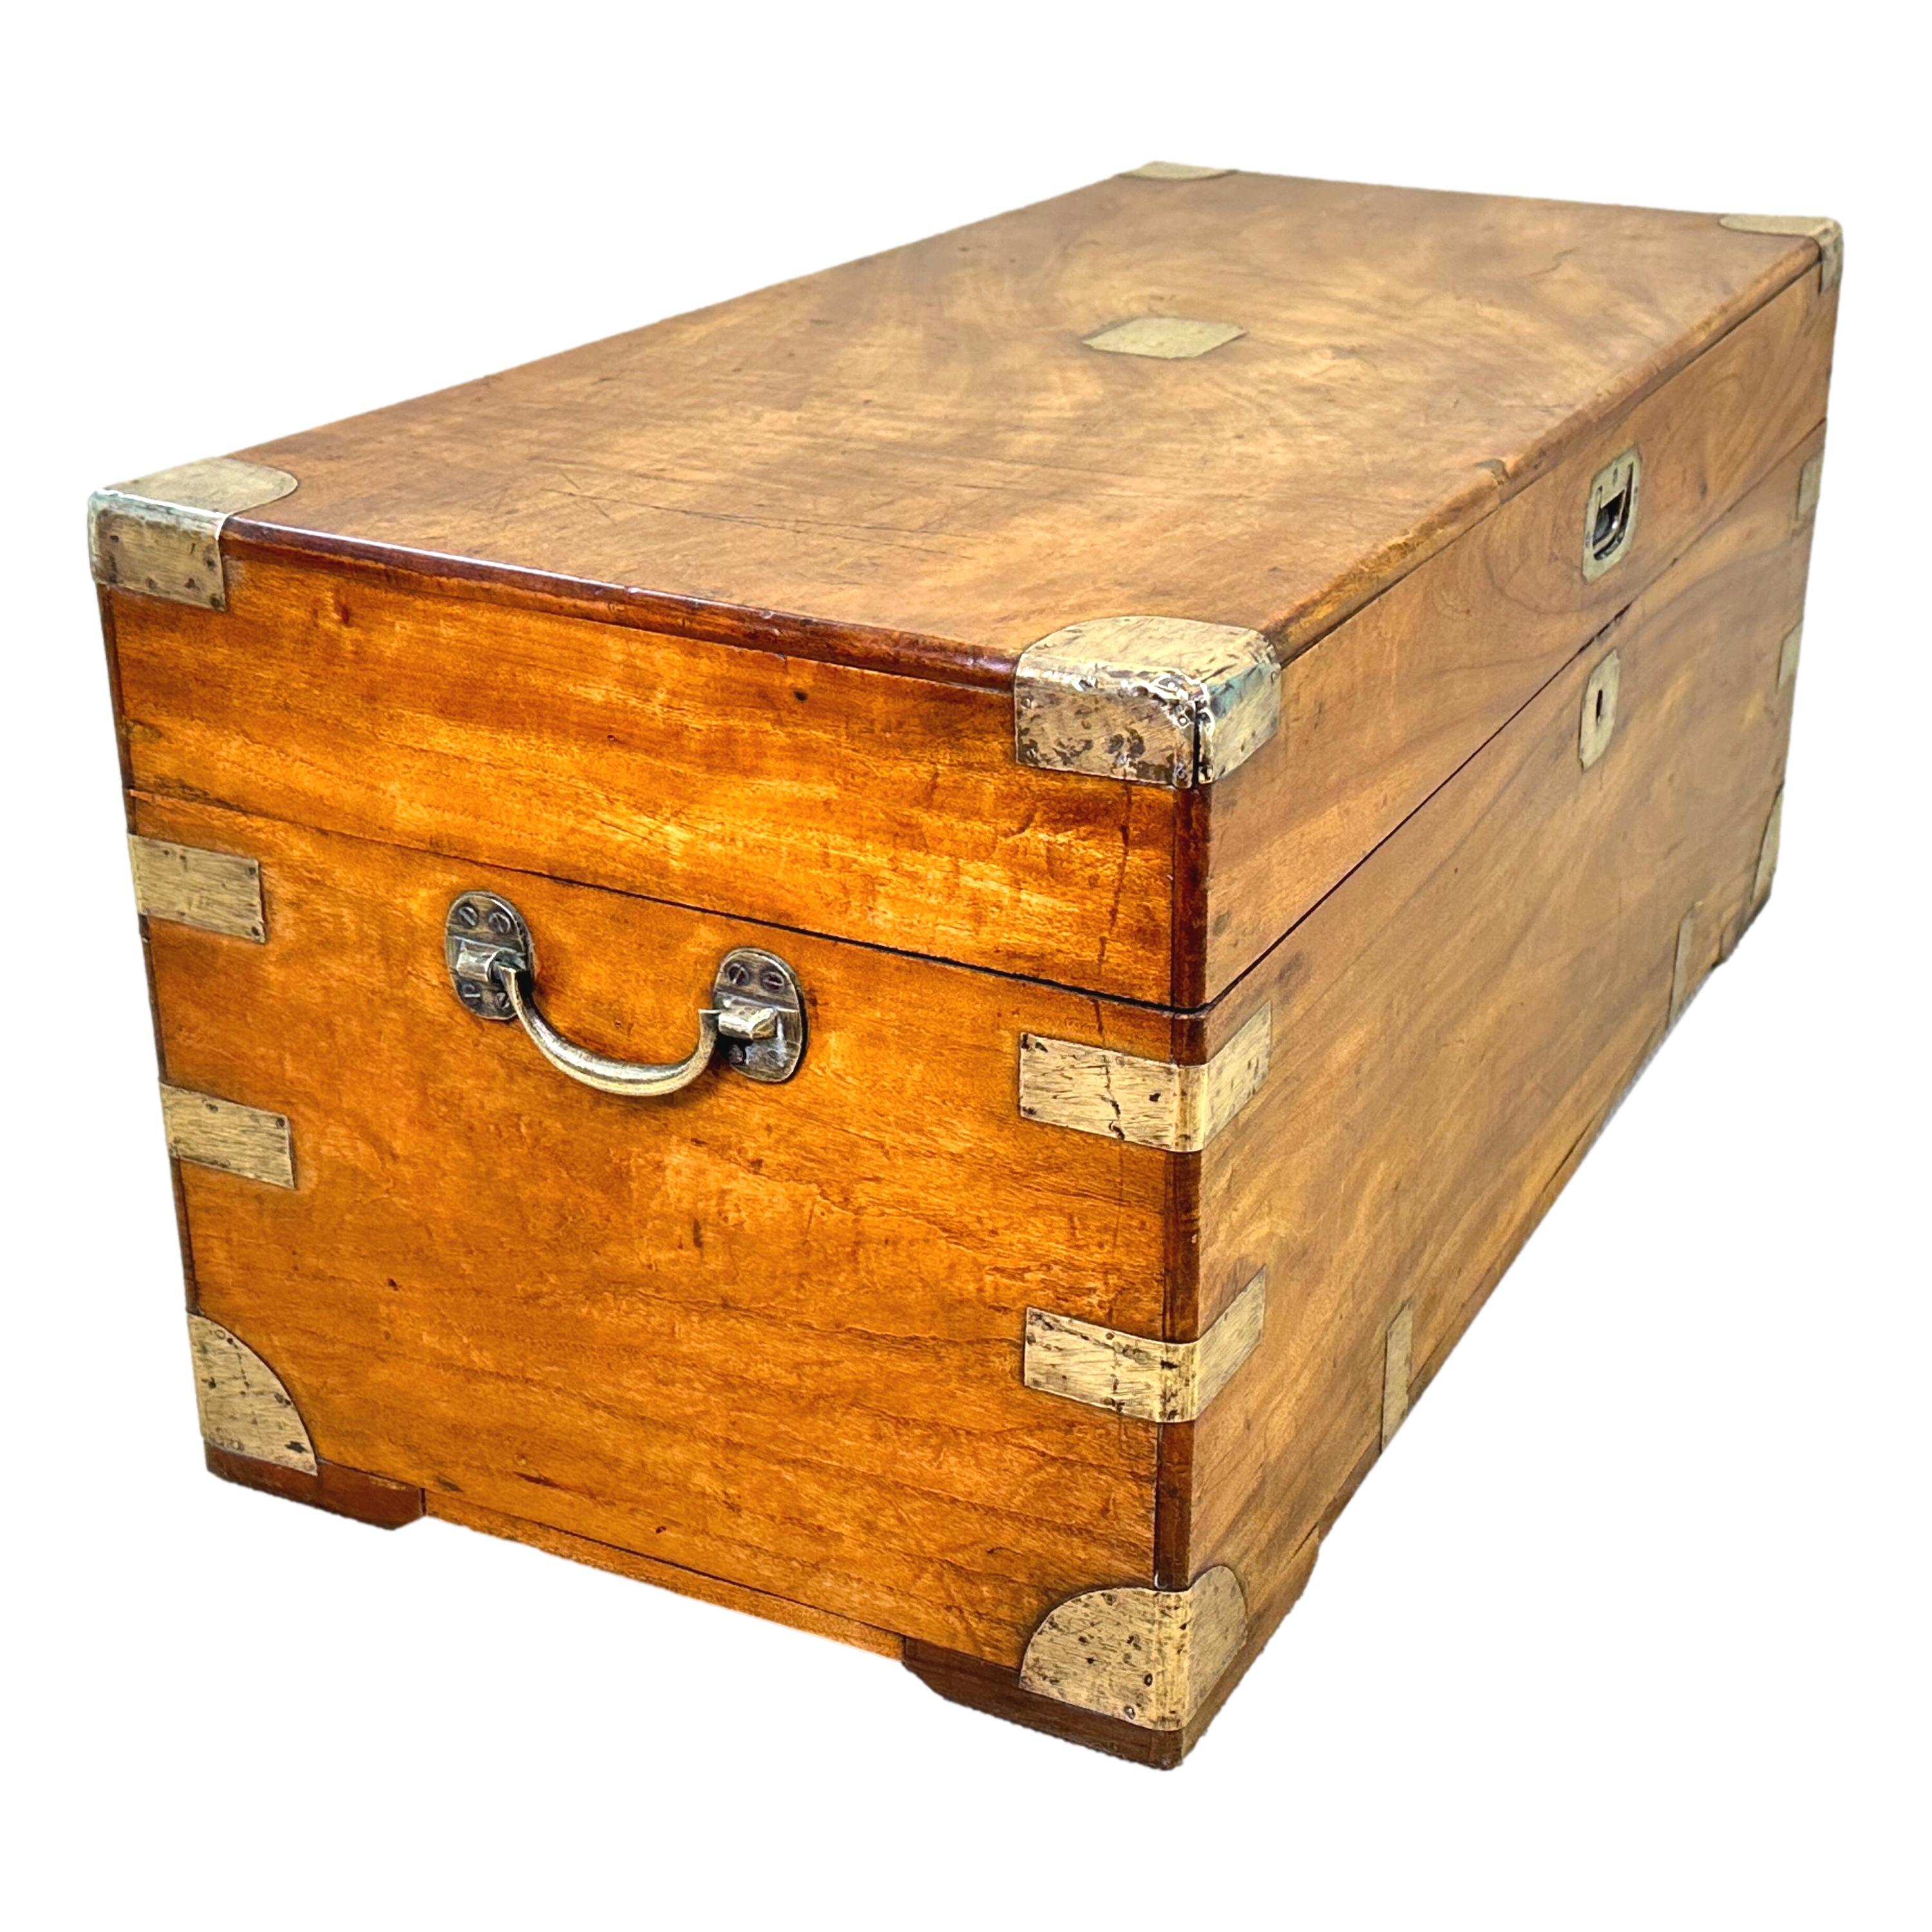 A Delightful Mid 19th Century Camphor Wood Military Campaign Trunk, Of Rare Small Proportions, Having Well Figured Lift Up Lid Enclosing Storage Space, Original Brass Bound Decoration And Original Brass Handles.


Its widely accepted that trunks